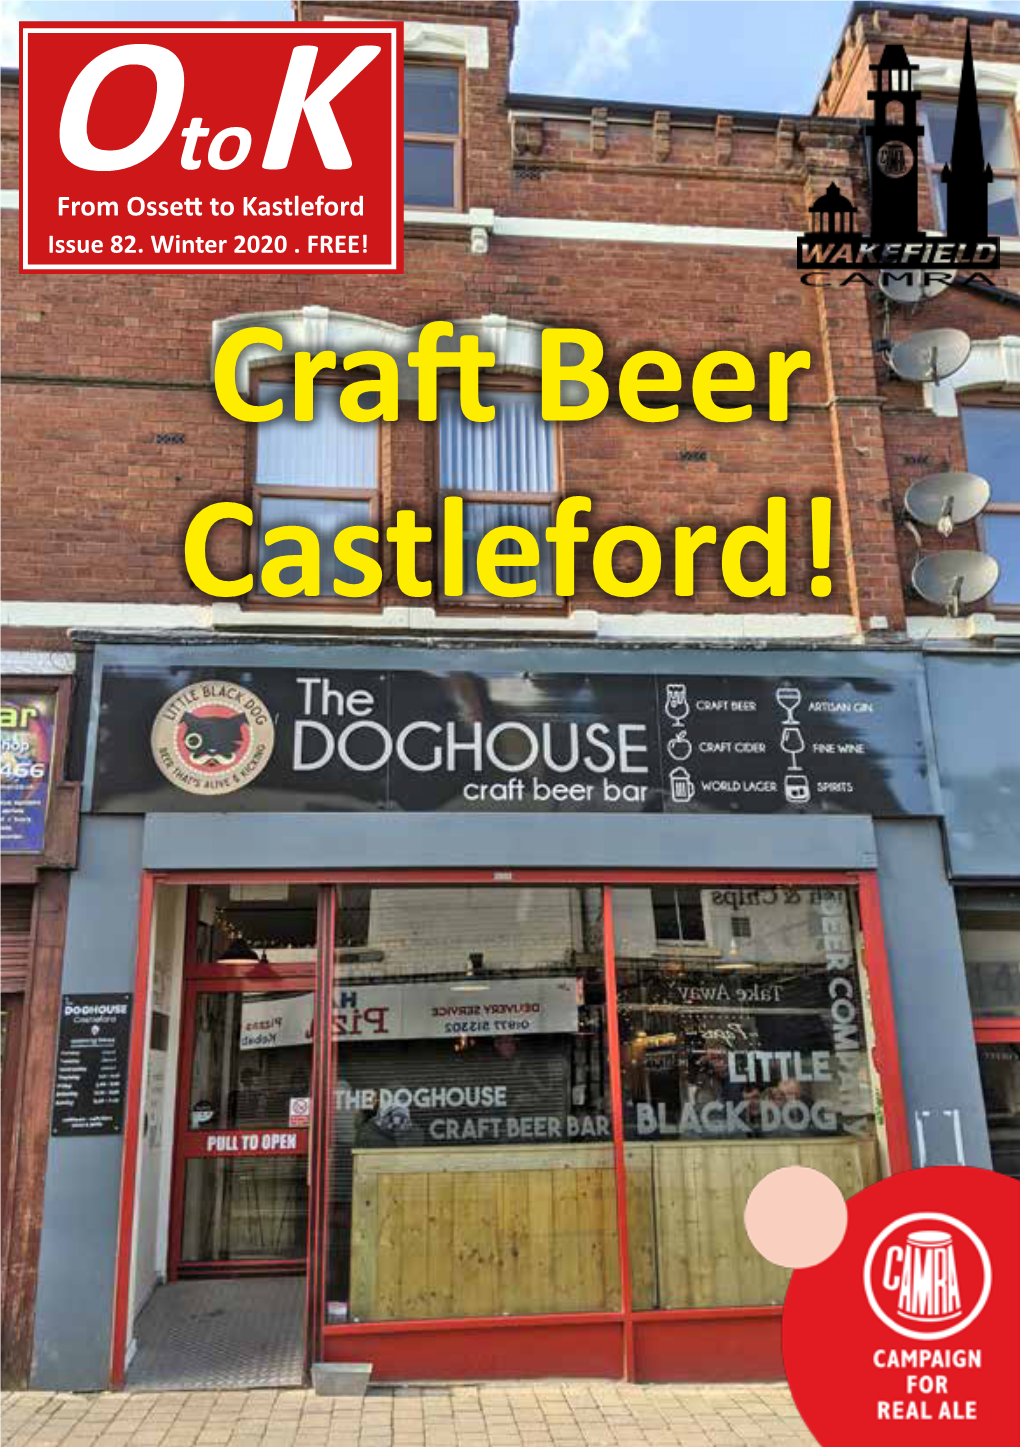 Craft Beer Castleford! THE72 New Road LITTLE Middlestown Wakefield BULL WF4 4NR